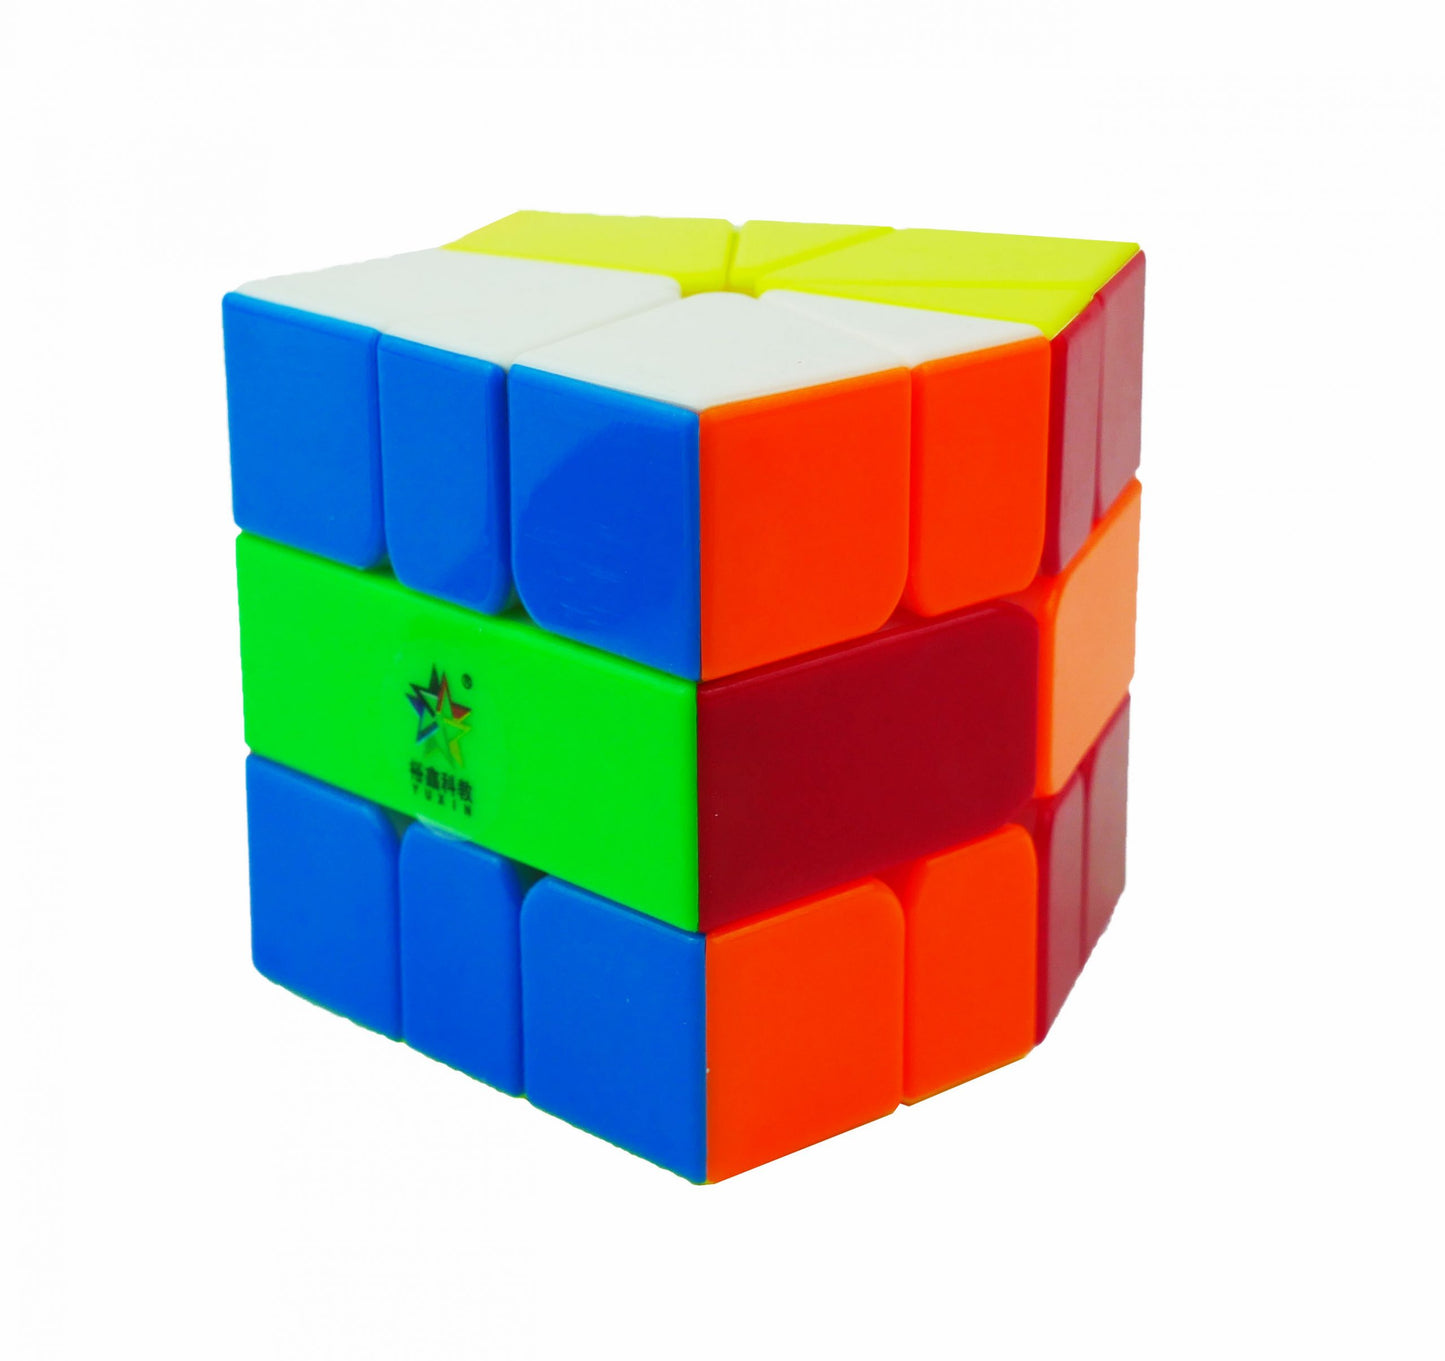 YuXin Little Magic Square-1 M (strong) (stickerless)